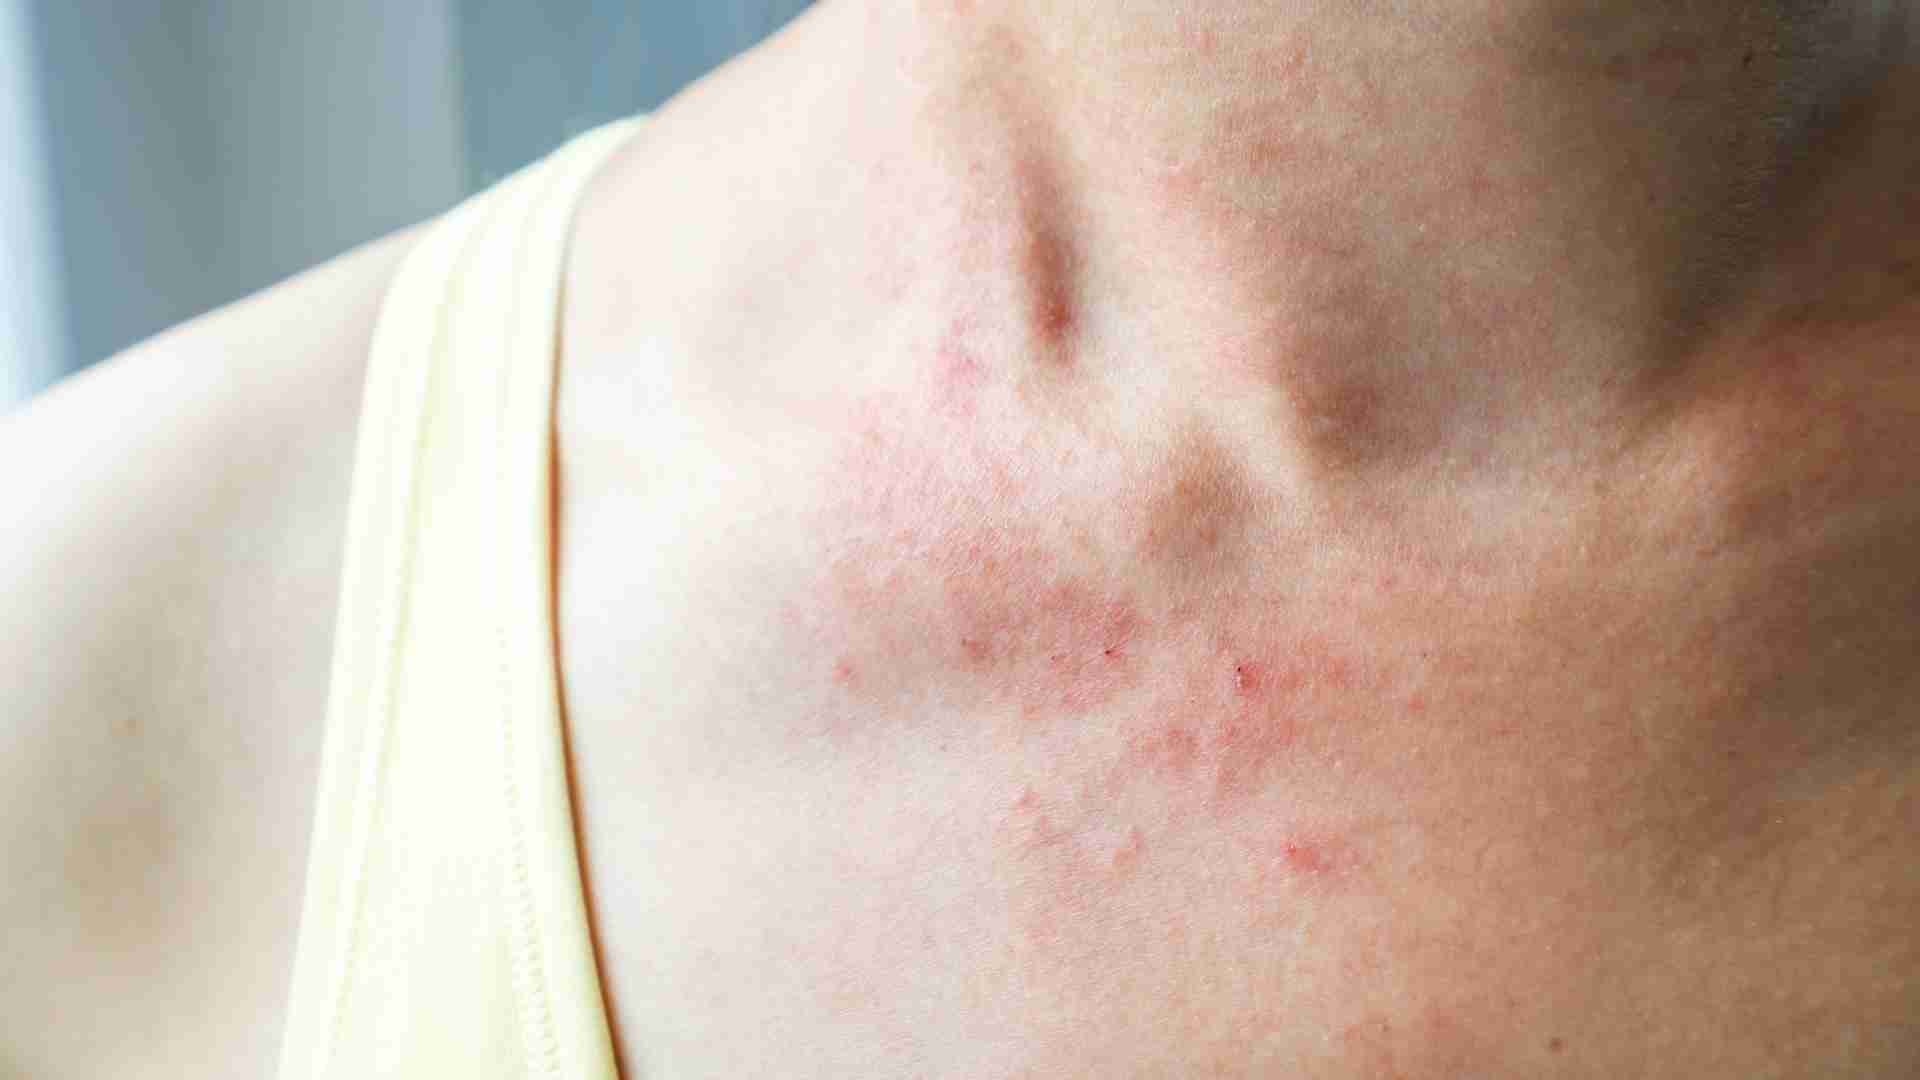 Woman with eczema and redness